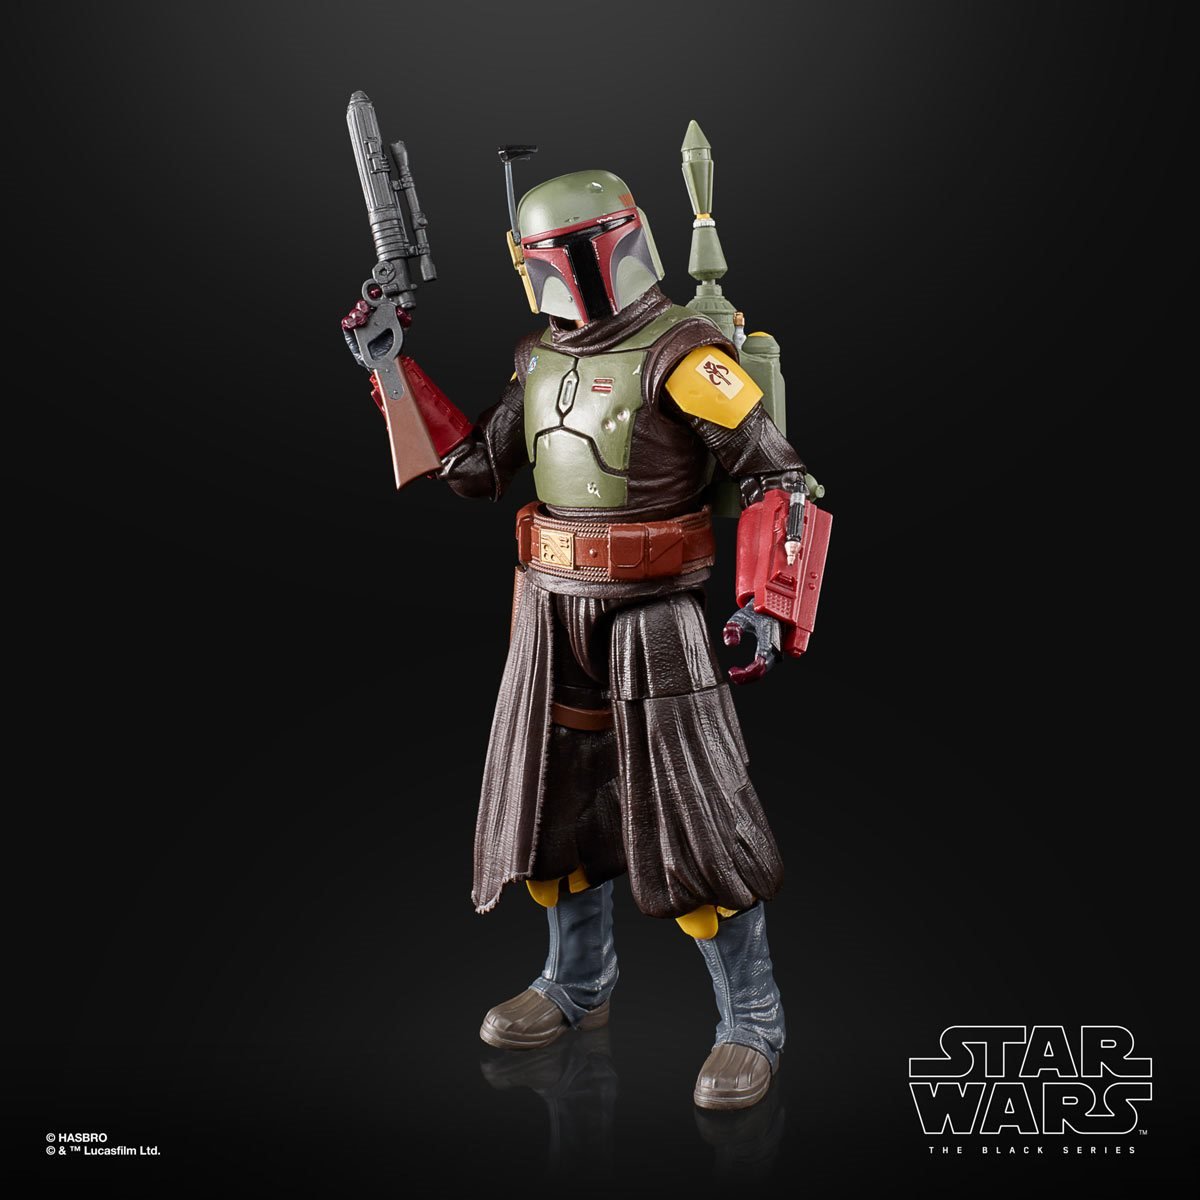 Star Wars The Black Series Boba Fett (Throne Room) Deluxe 6-Inch Action ...